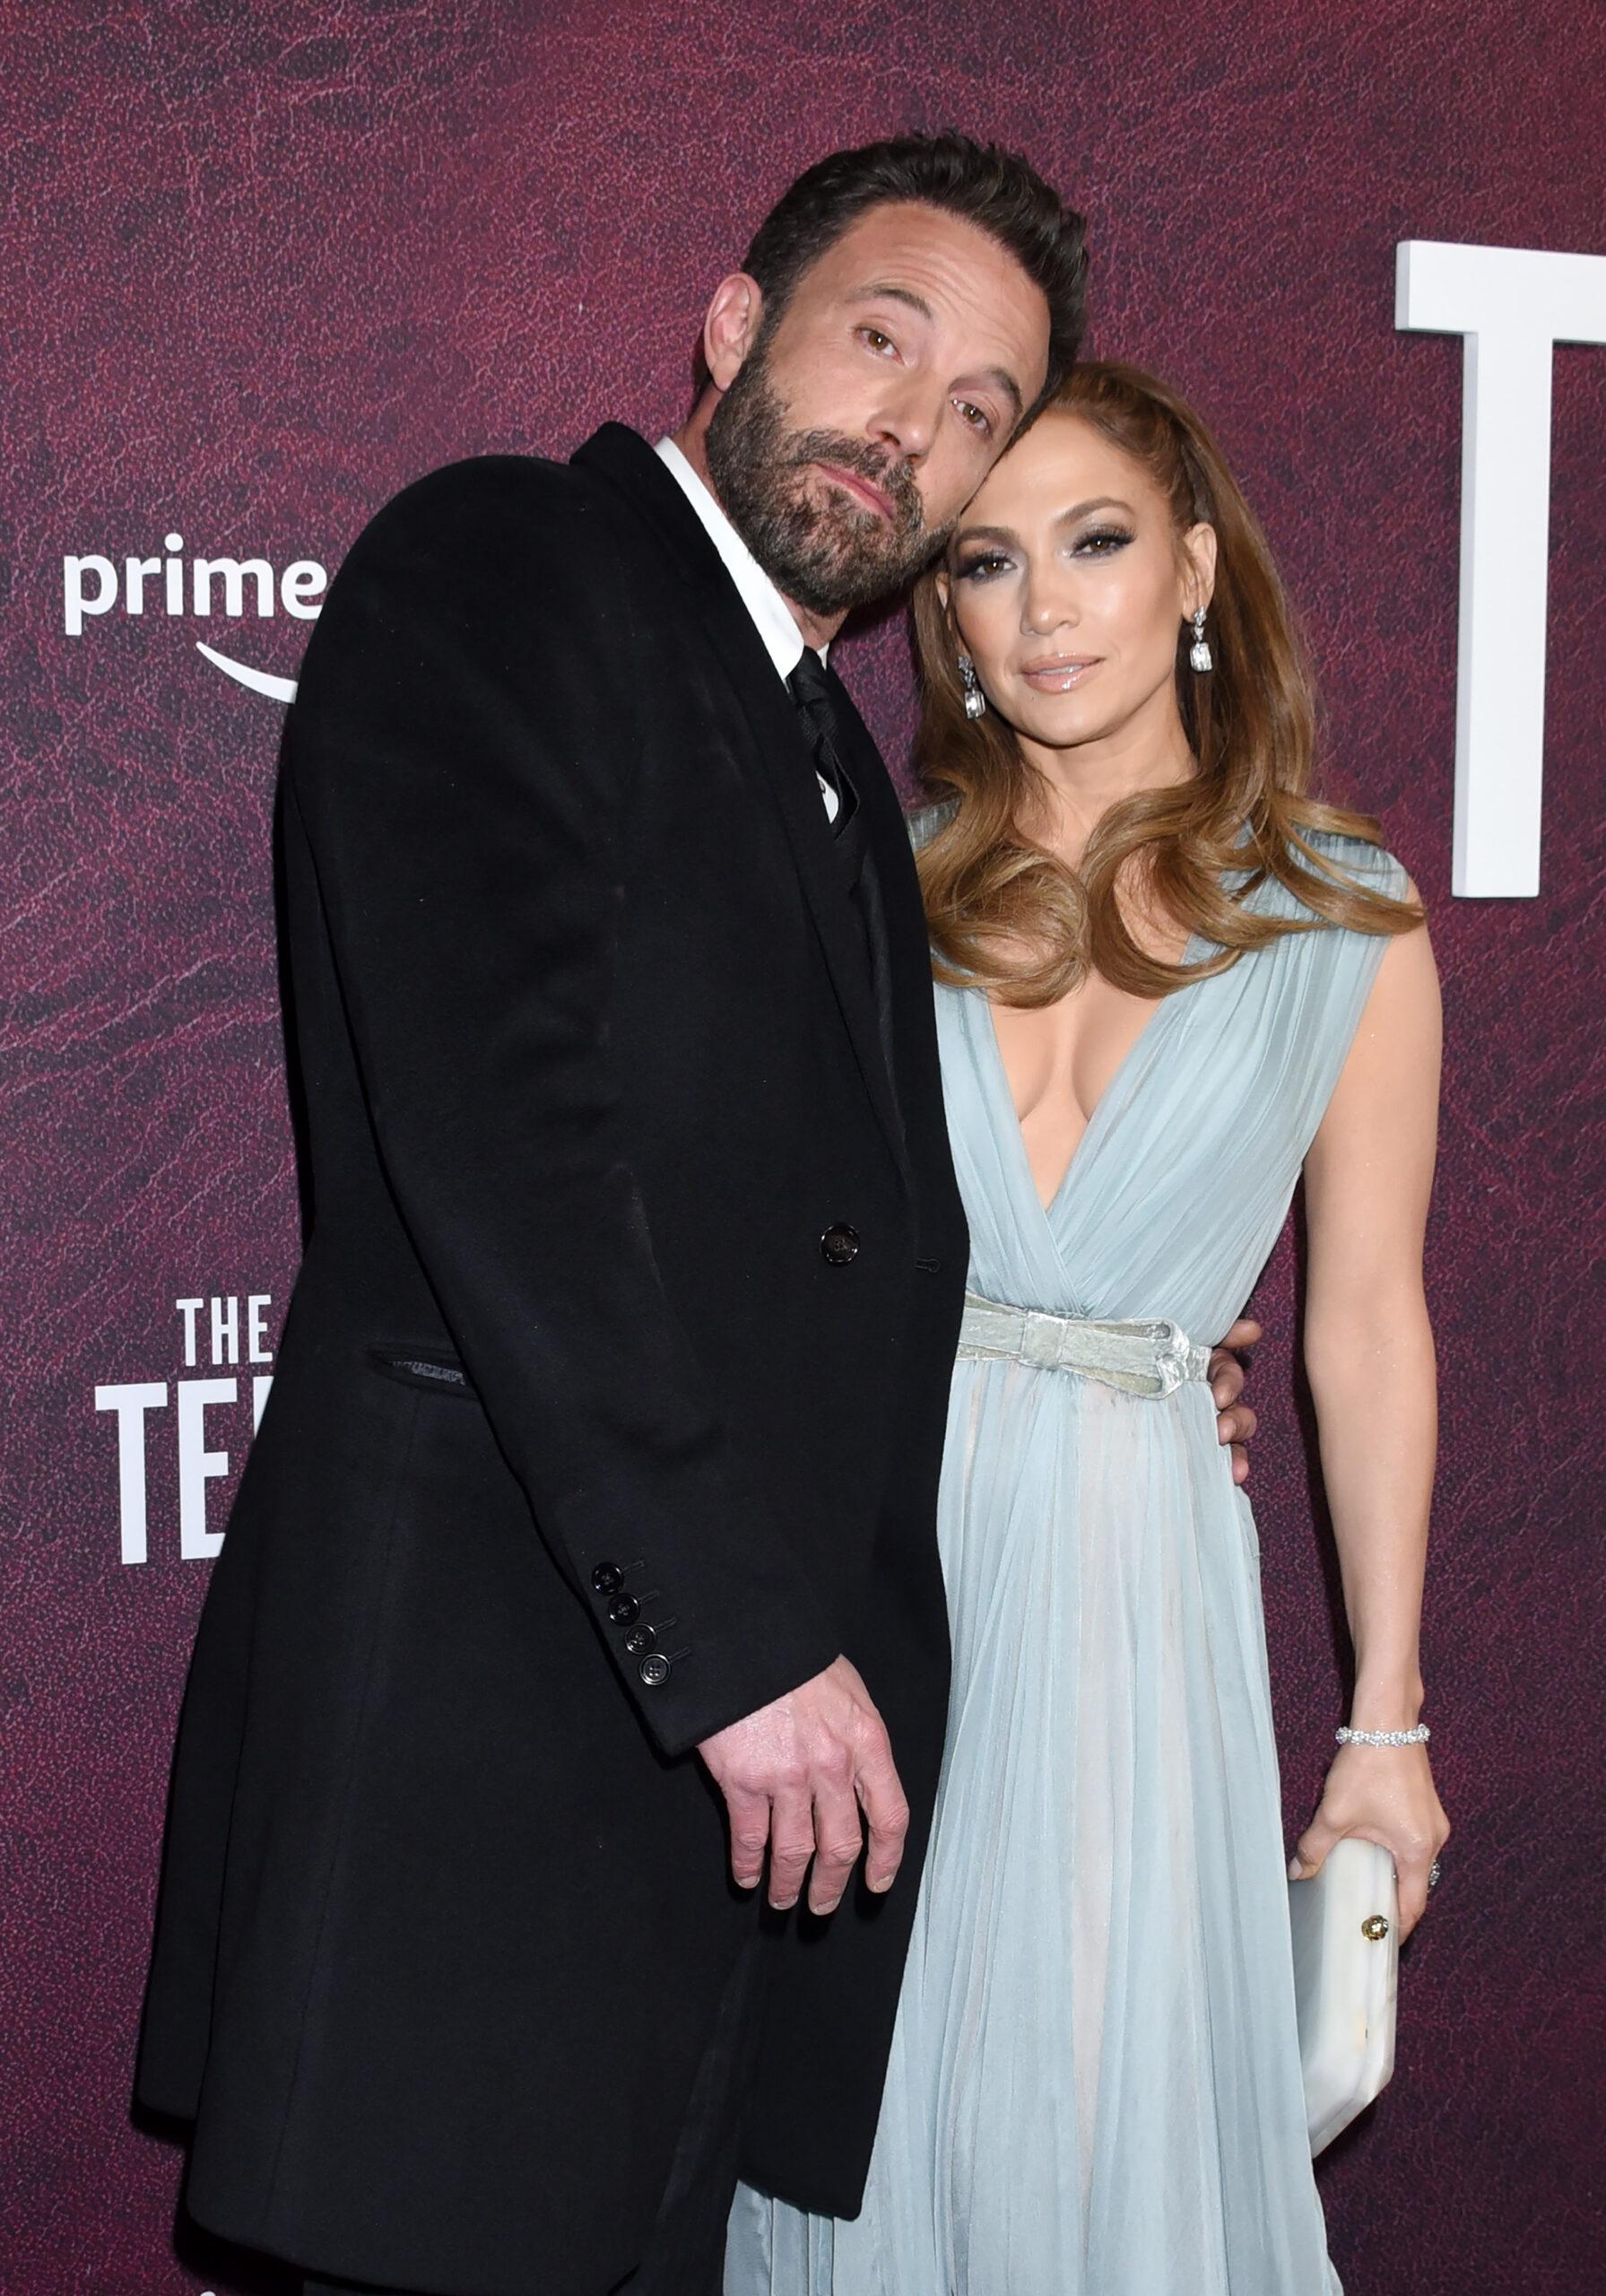 Ben Affleck and Jennifer Lopez at the 'The Tender' Bar Los Angeles Premiere